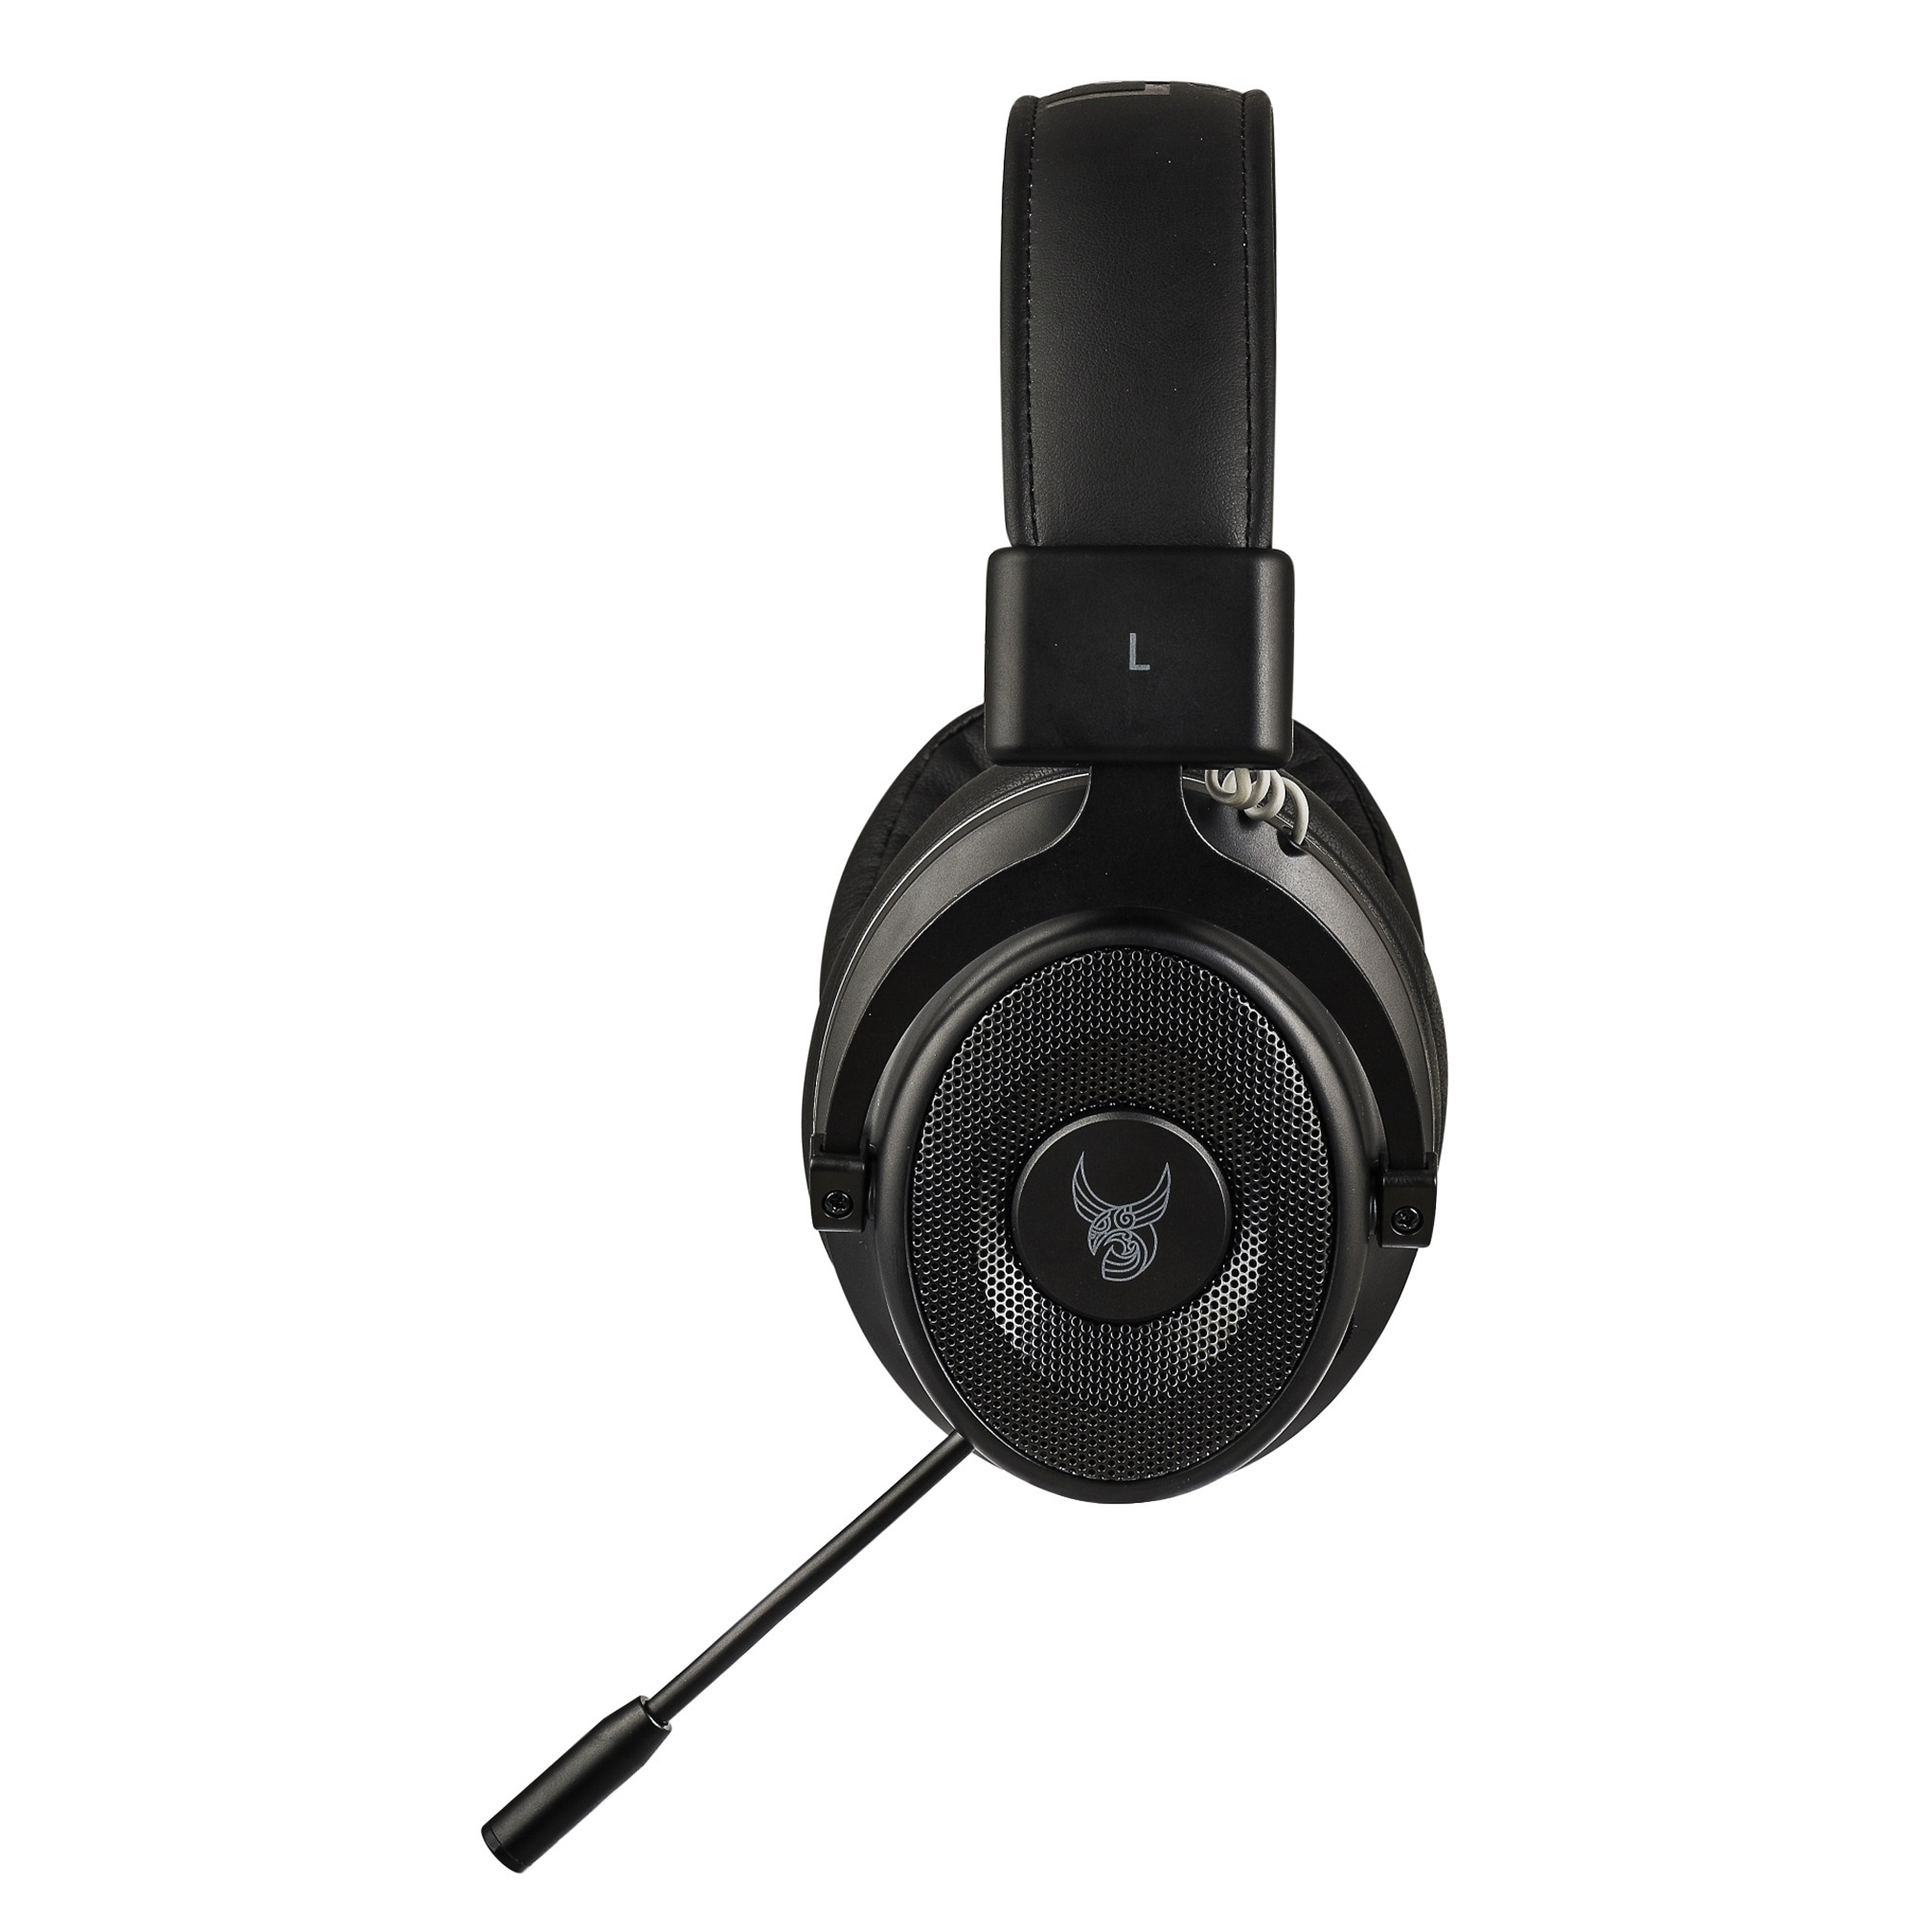 L33T 160376, Over-ear cremeweiß Gaming Headset